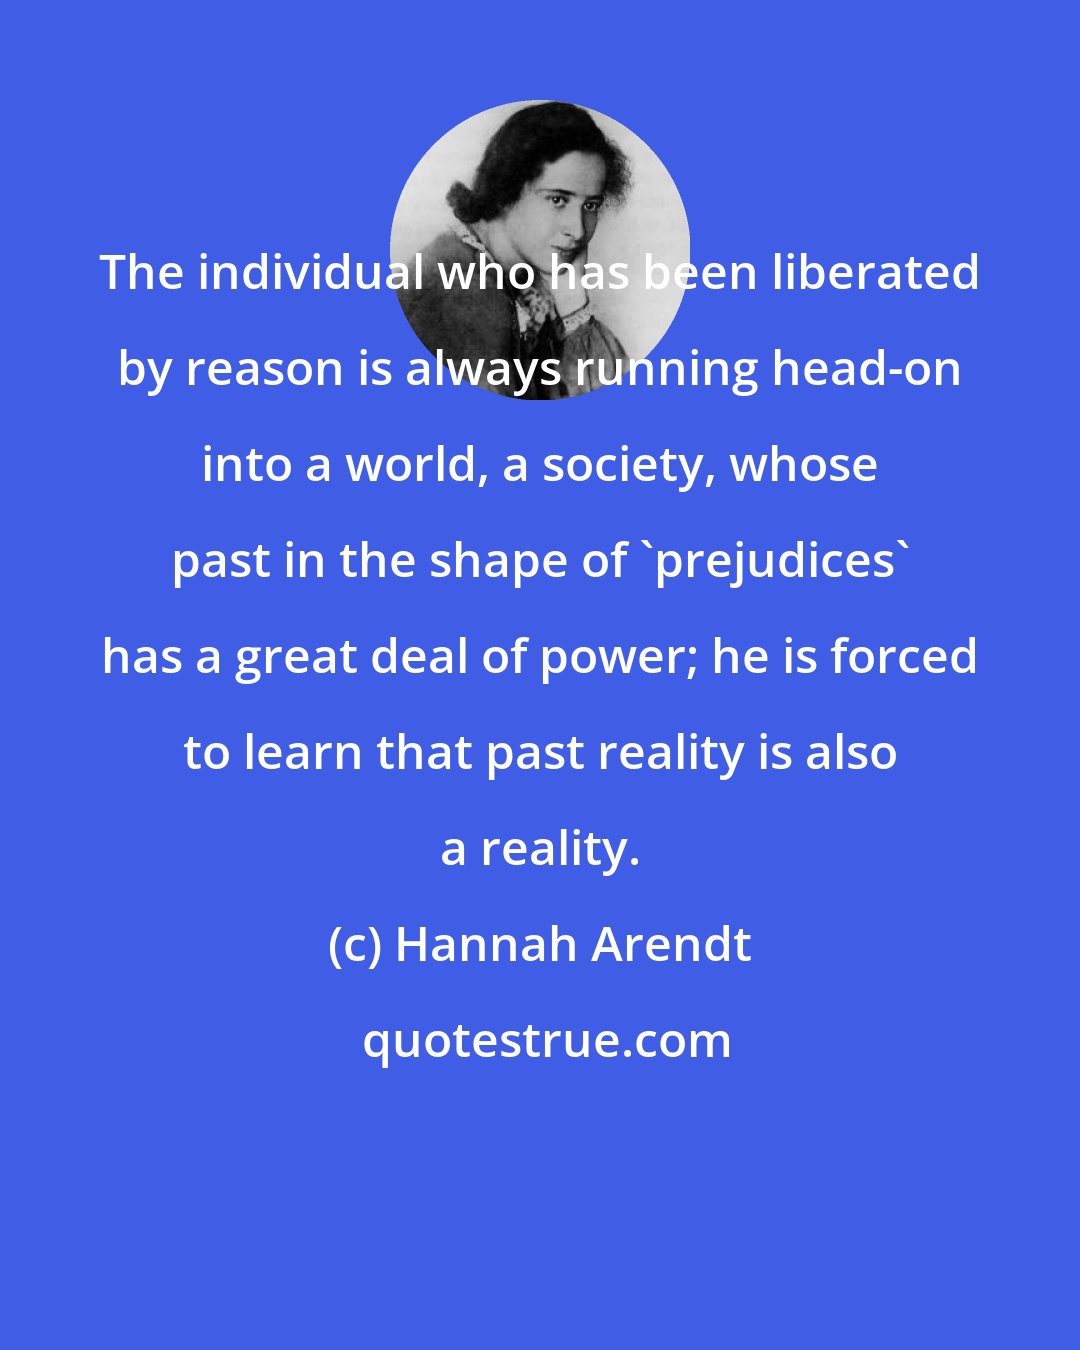 Hannah Arendt: The individual who has been liberated by reason is always running head-on into a world, a society, whose past in the shape of 'prejudices' has a great deal of power; he is forced to learn that past reality is also a reality.